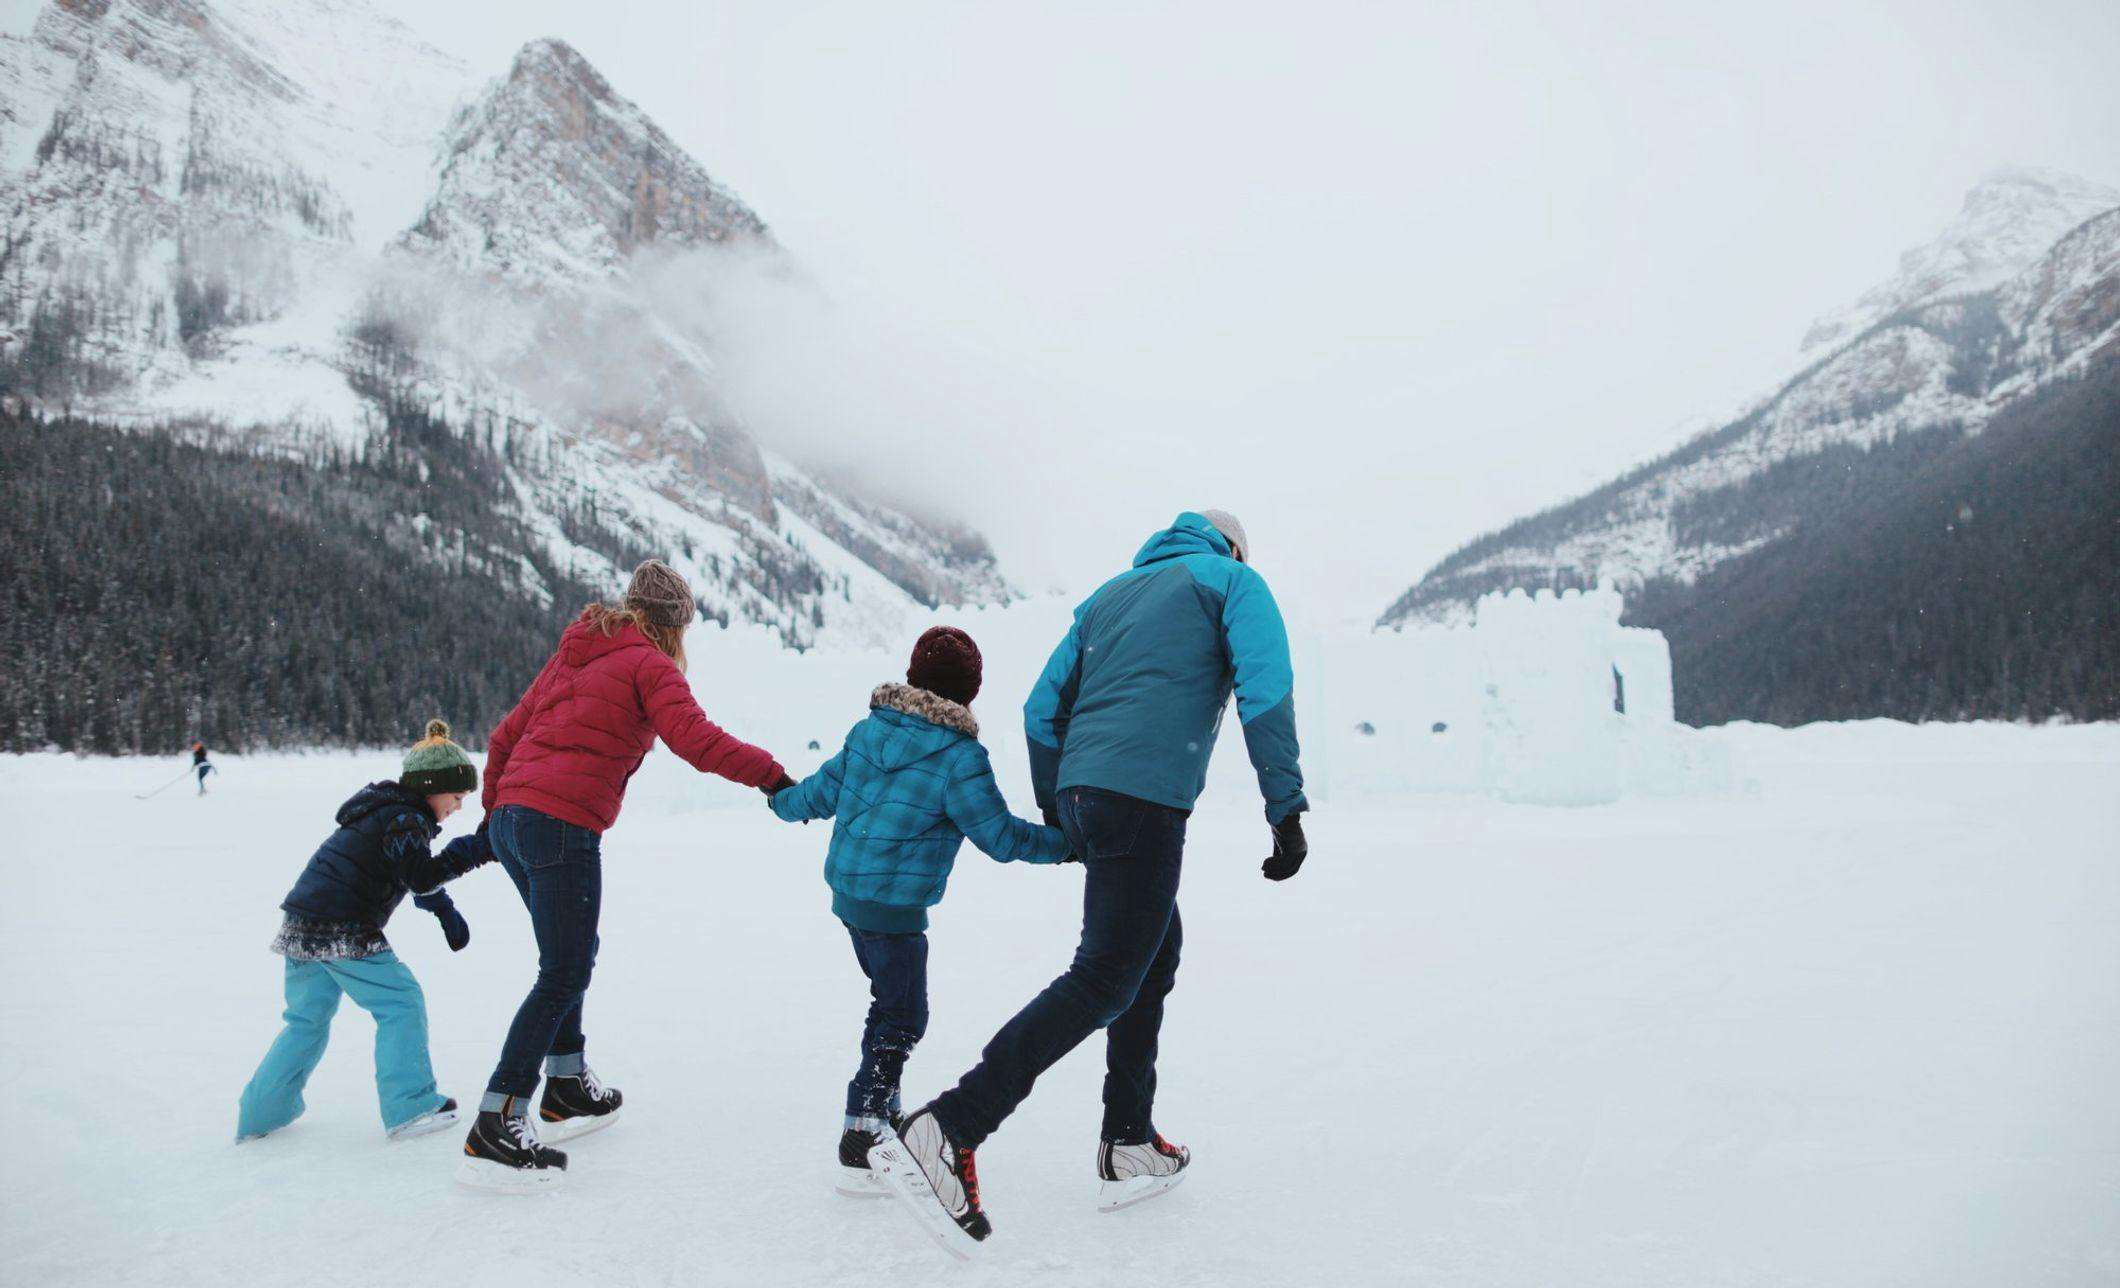 Family of four skating on a frozen lake with mountains in the background